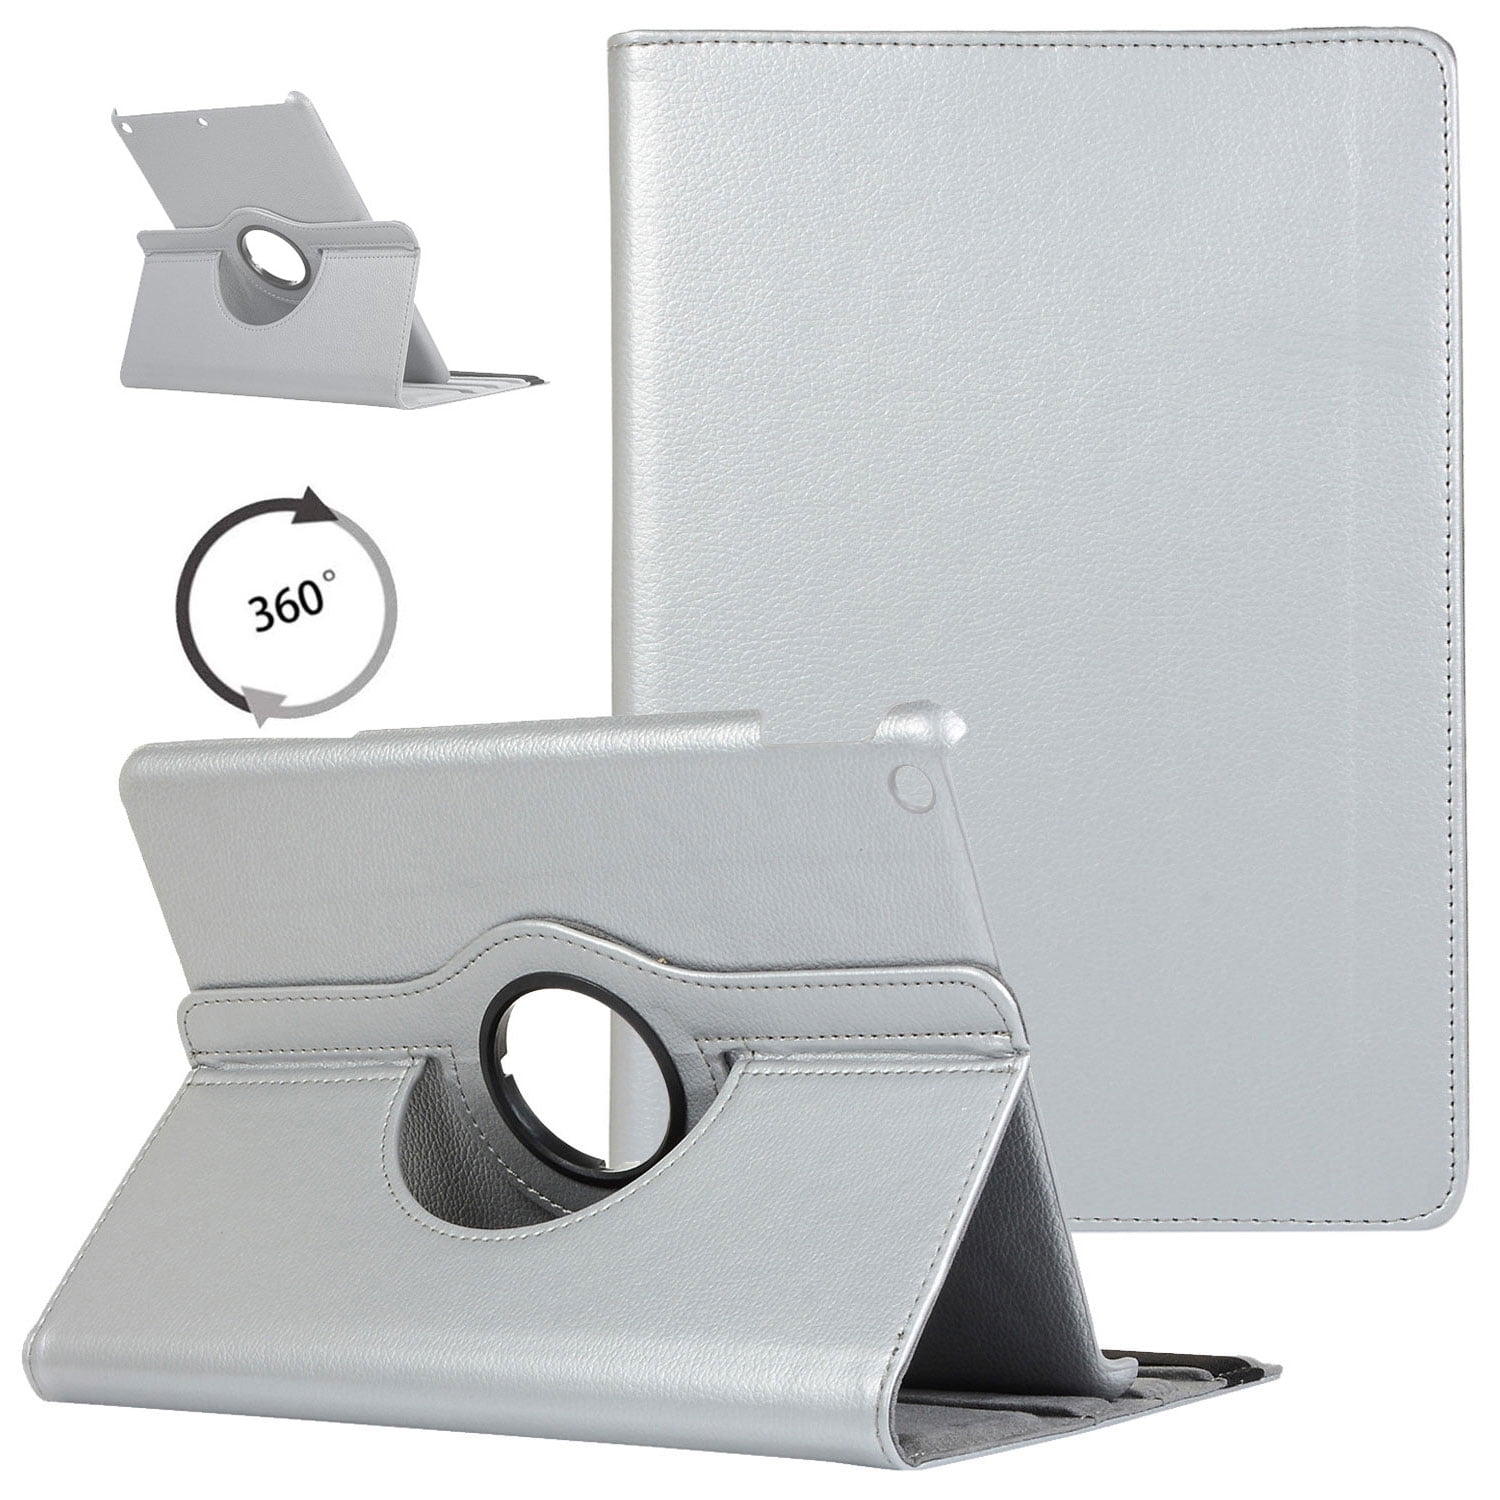 9.7" Folding Folio Smart Case 360 Rotate Stand Cover For Apple iPad 2018 6th Gen 